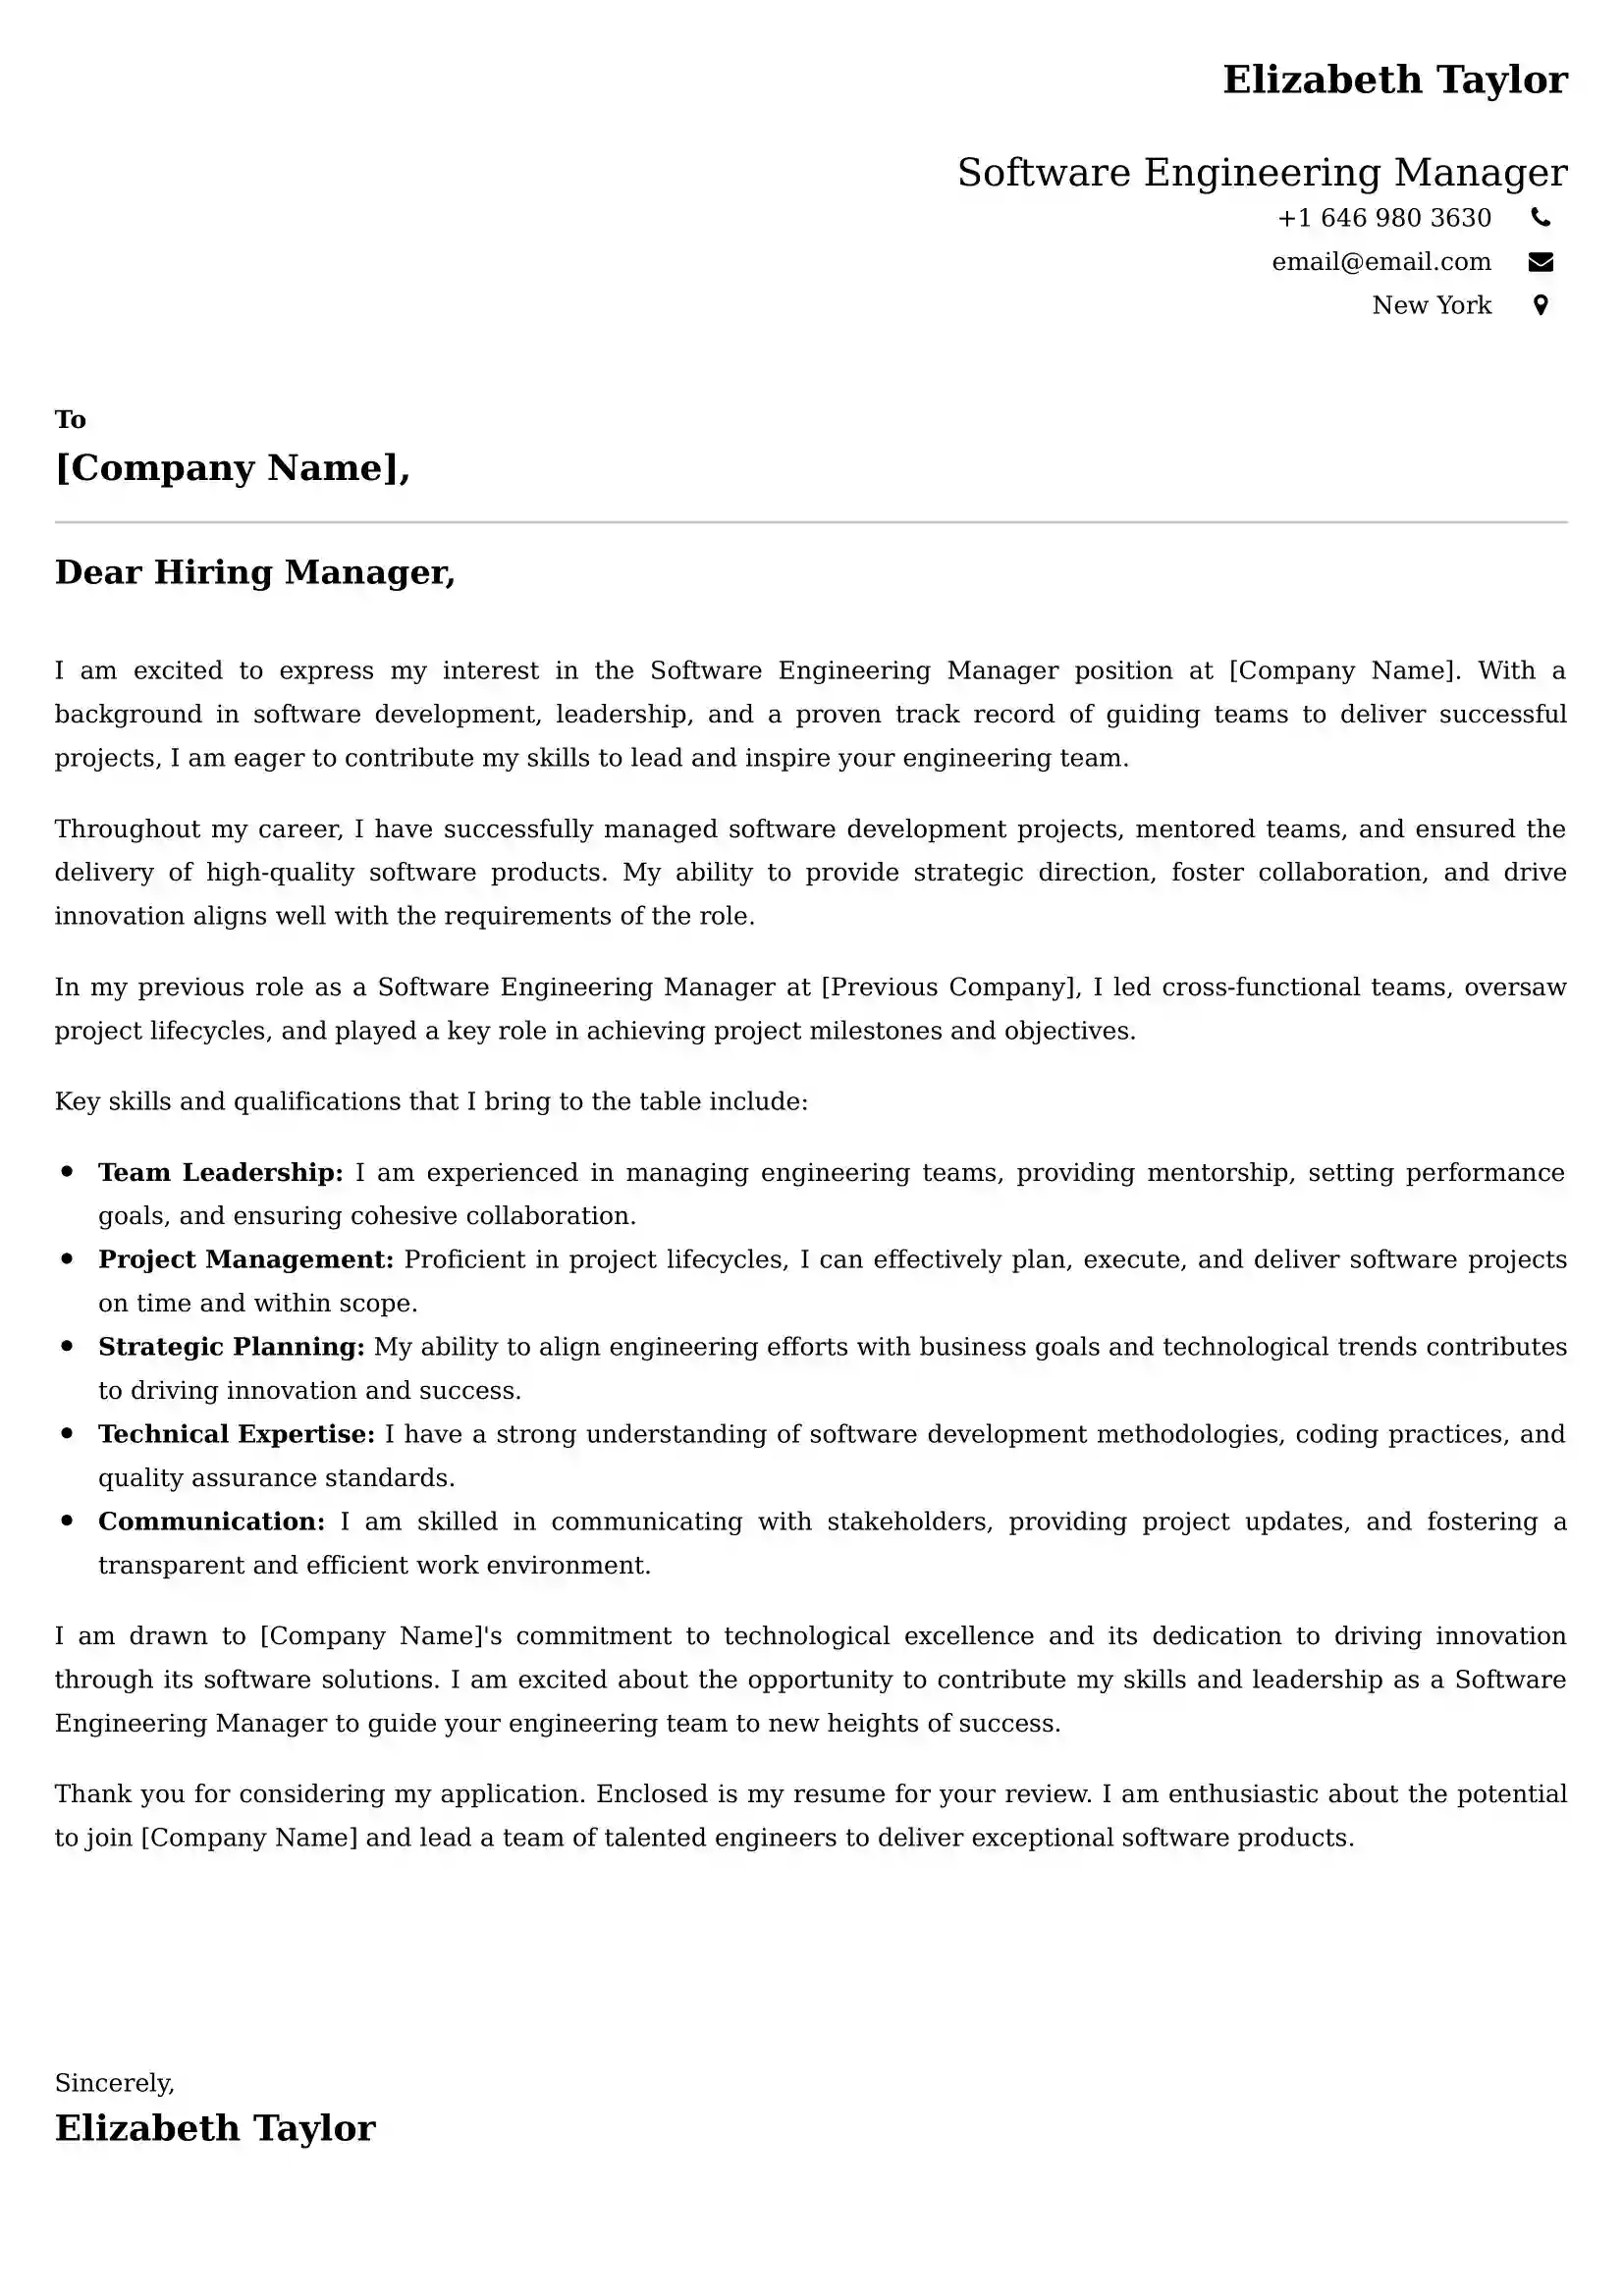 Software Engineering Manager Cover Letter Examples for UK 